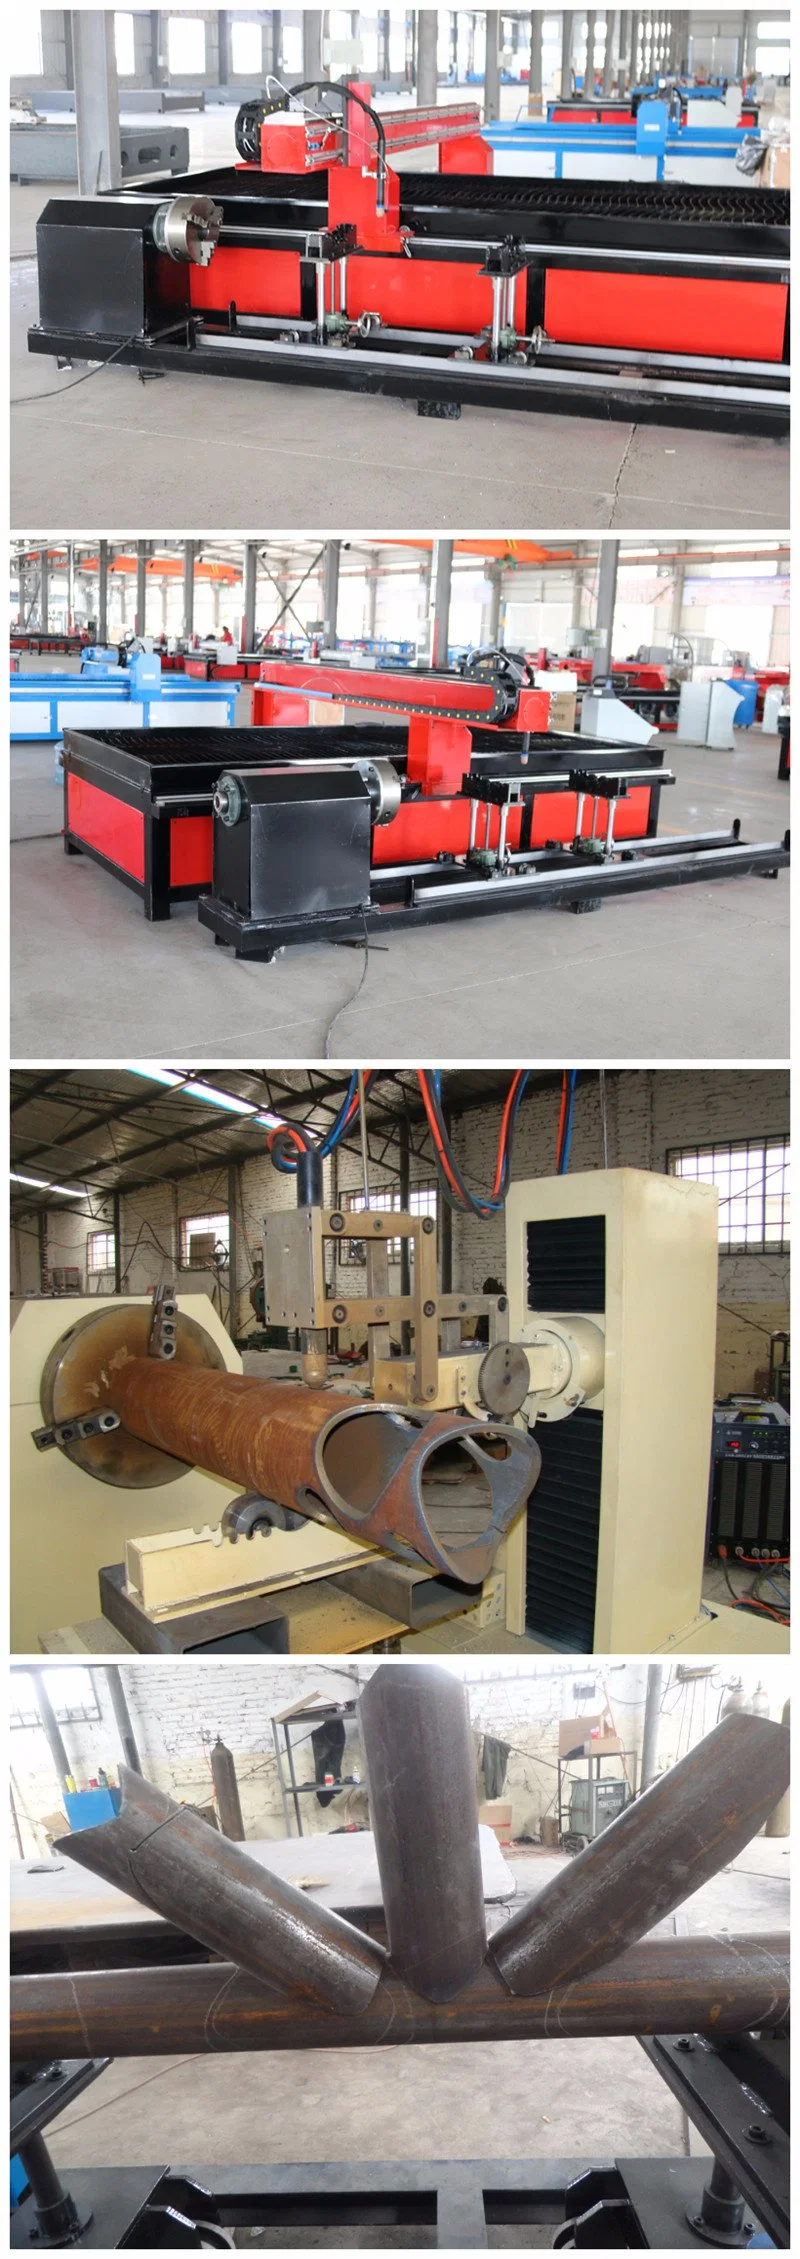 Made in China Metal Cutting Machinery Steel Pipe and Steel Sheet Double Use CNC Machine Plasma Cutter in Stock